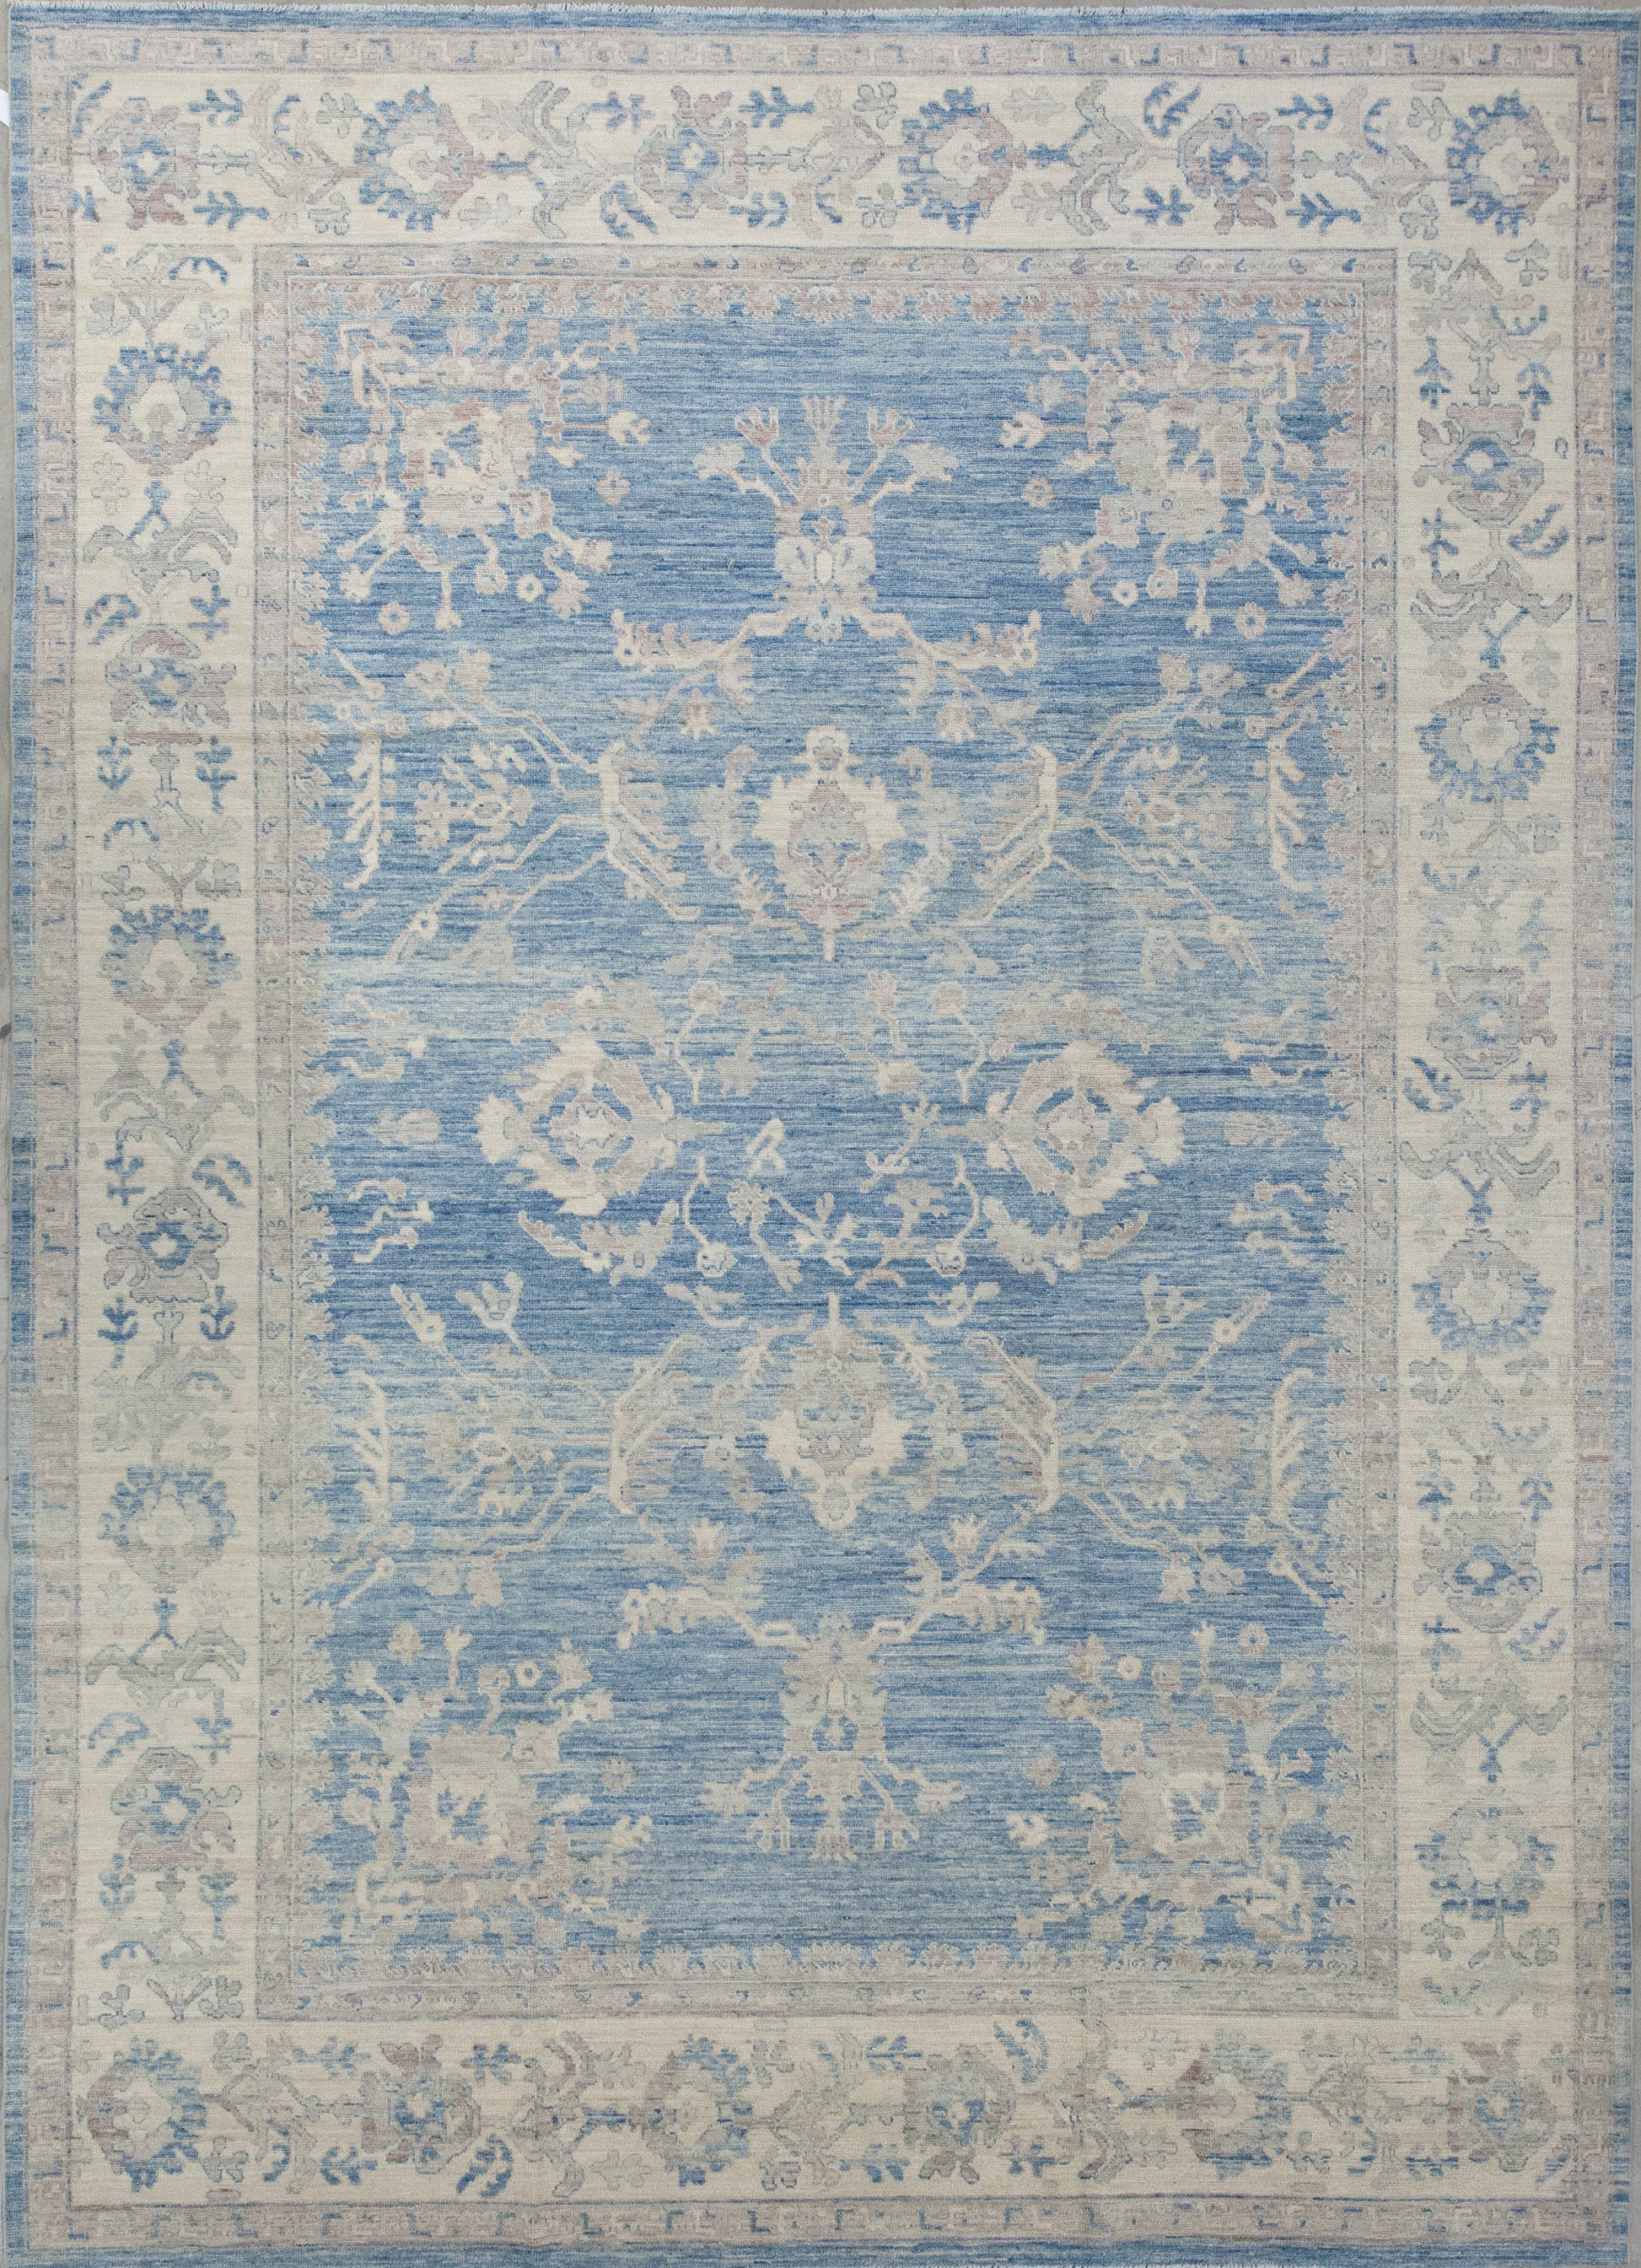 Beautiful classical carpet was woven with denim background, and beige contour. The two-tone color scheme makes this rug a smart purchase for your delight. 